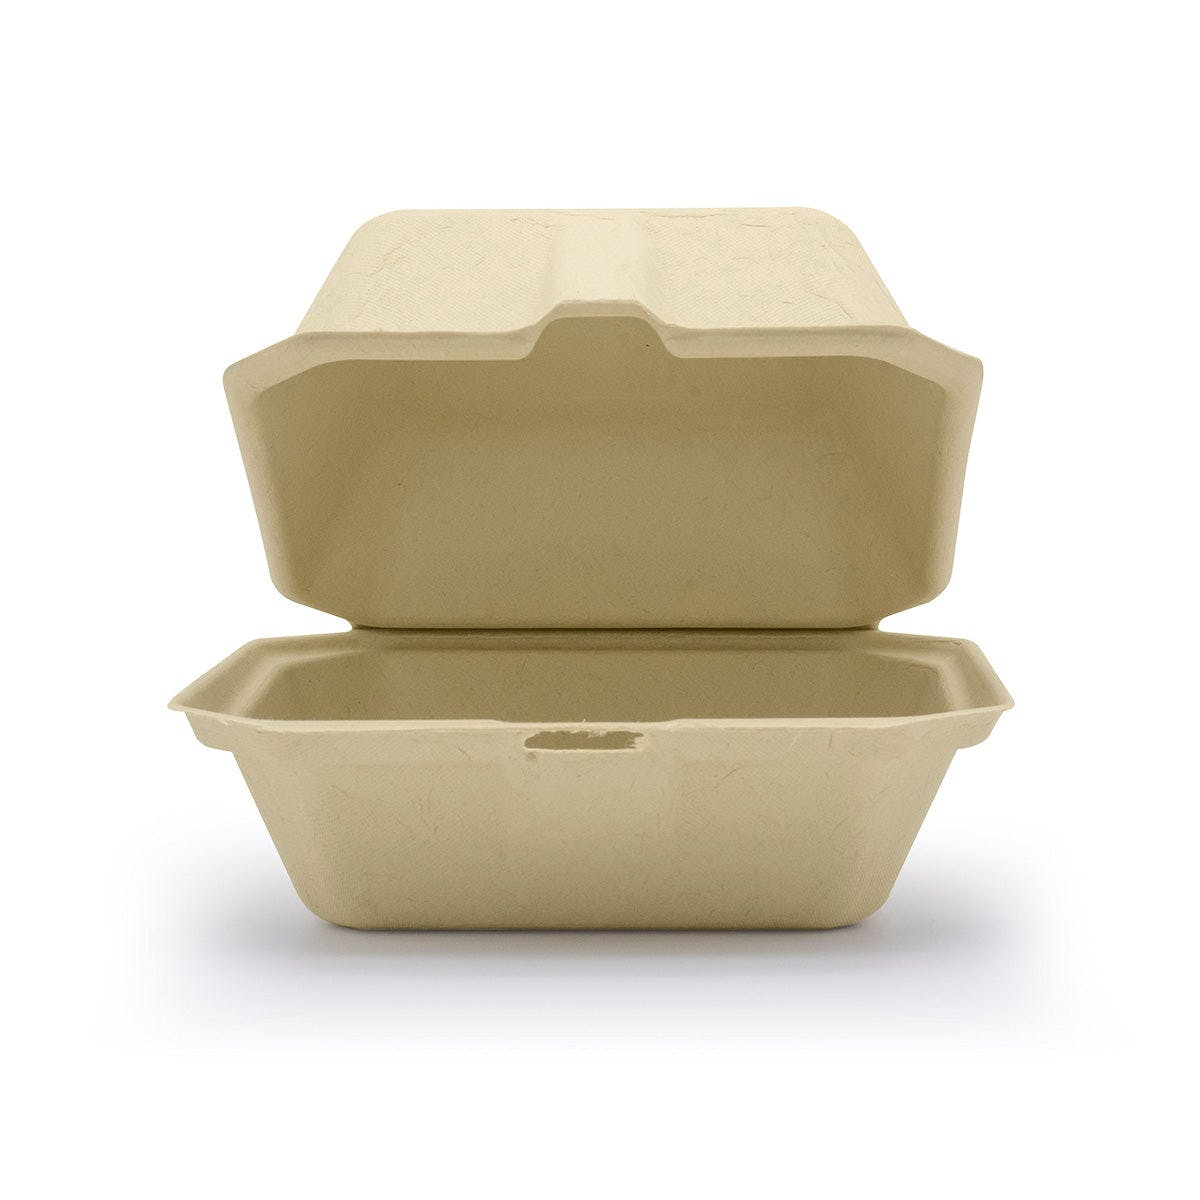 compostable and disposable clamshell on white background